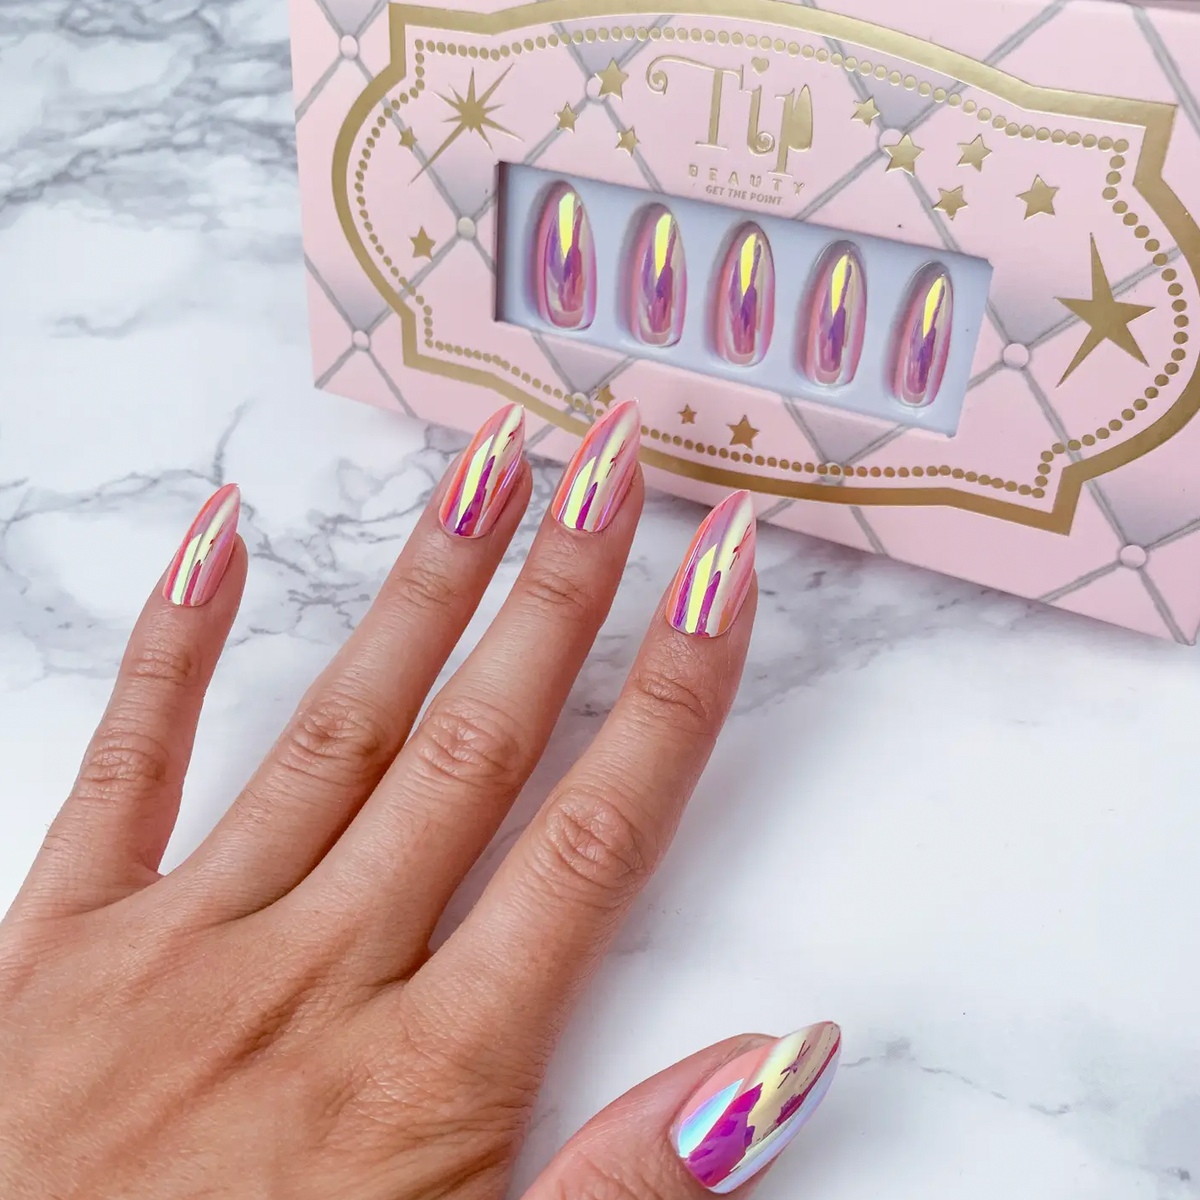 coquette nails with charms｜TikTok Search